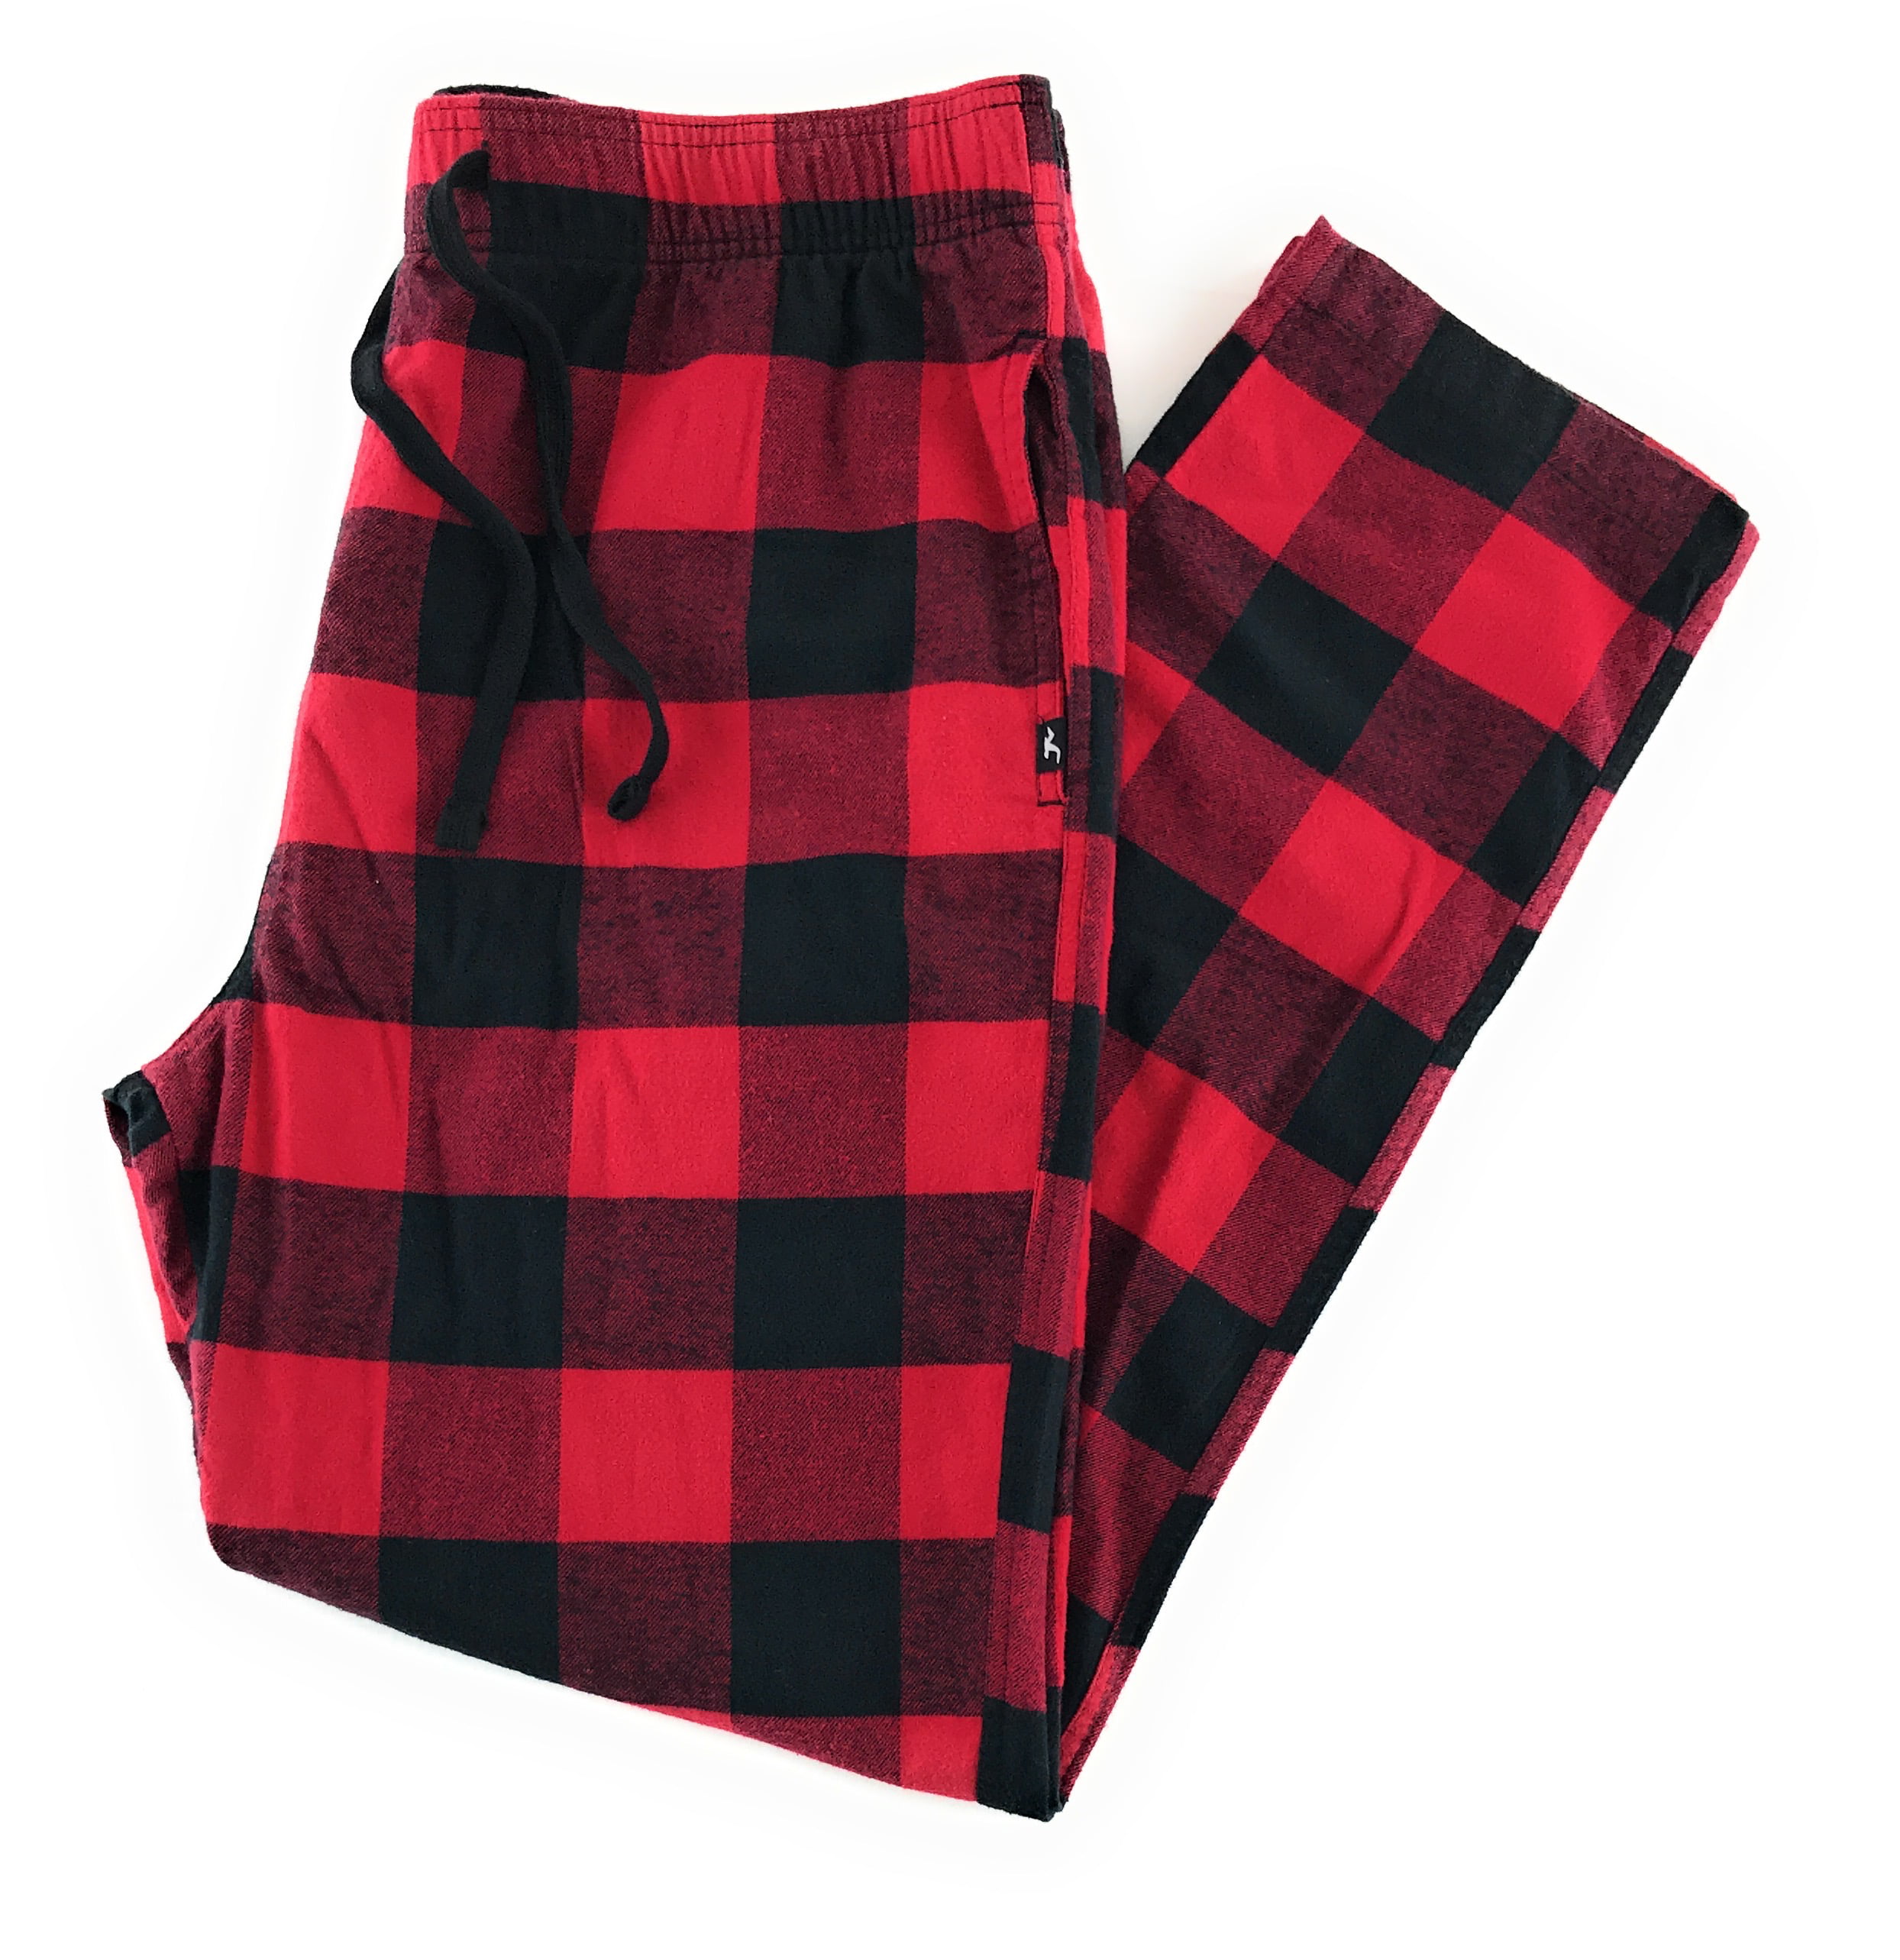 hollister red and black flannel